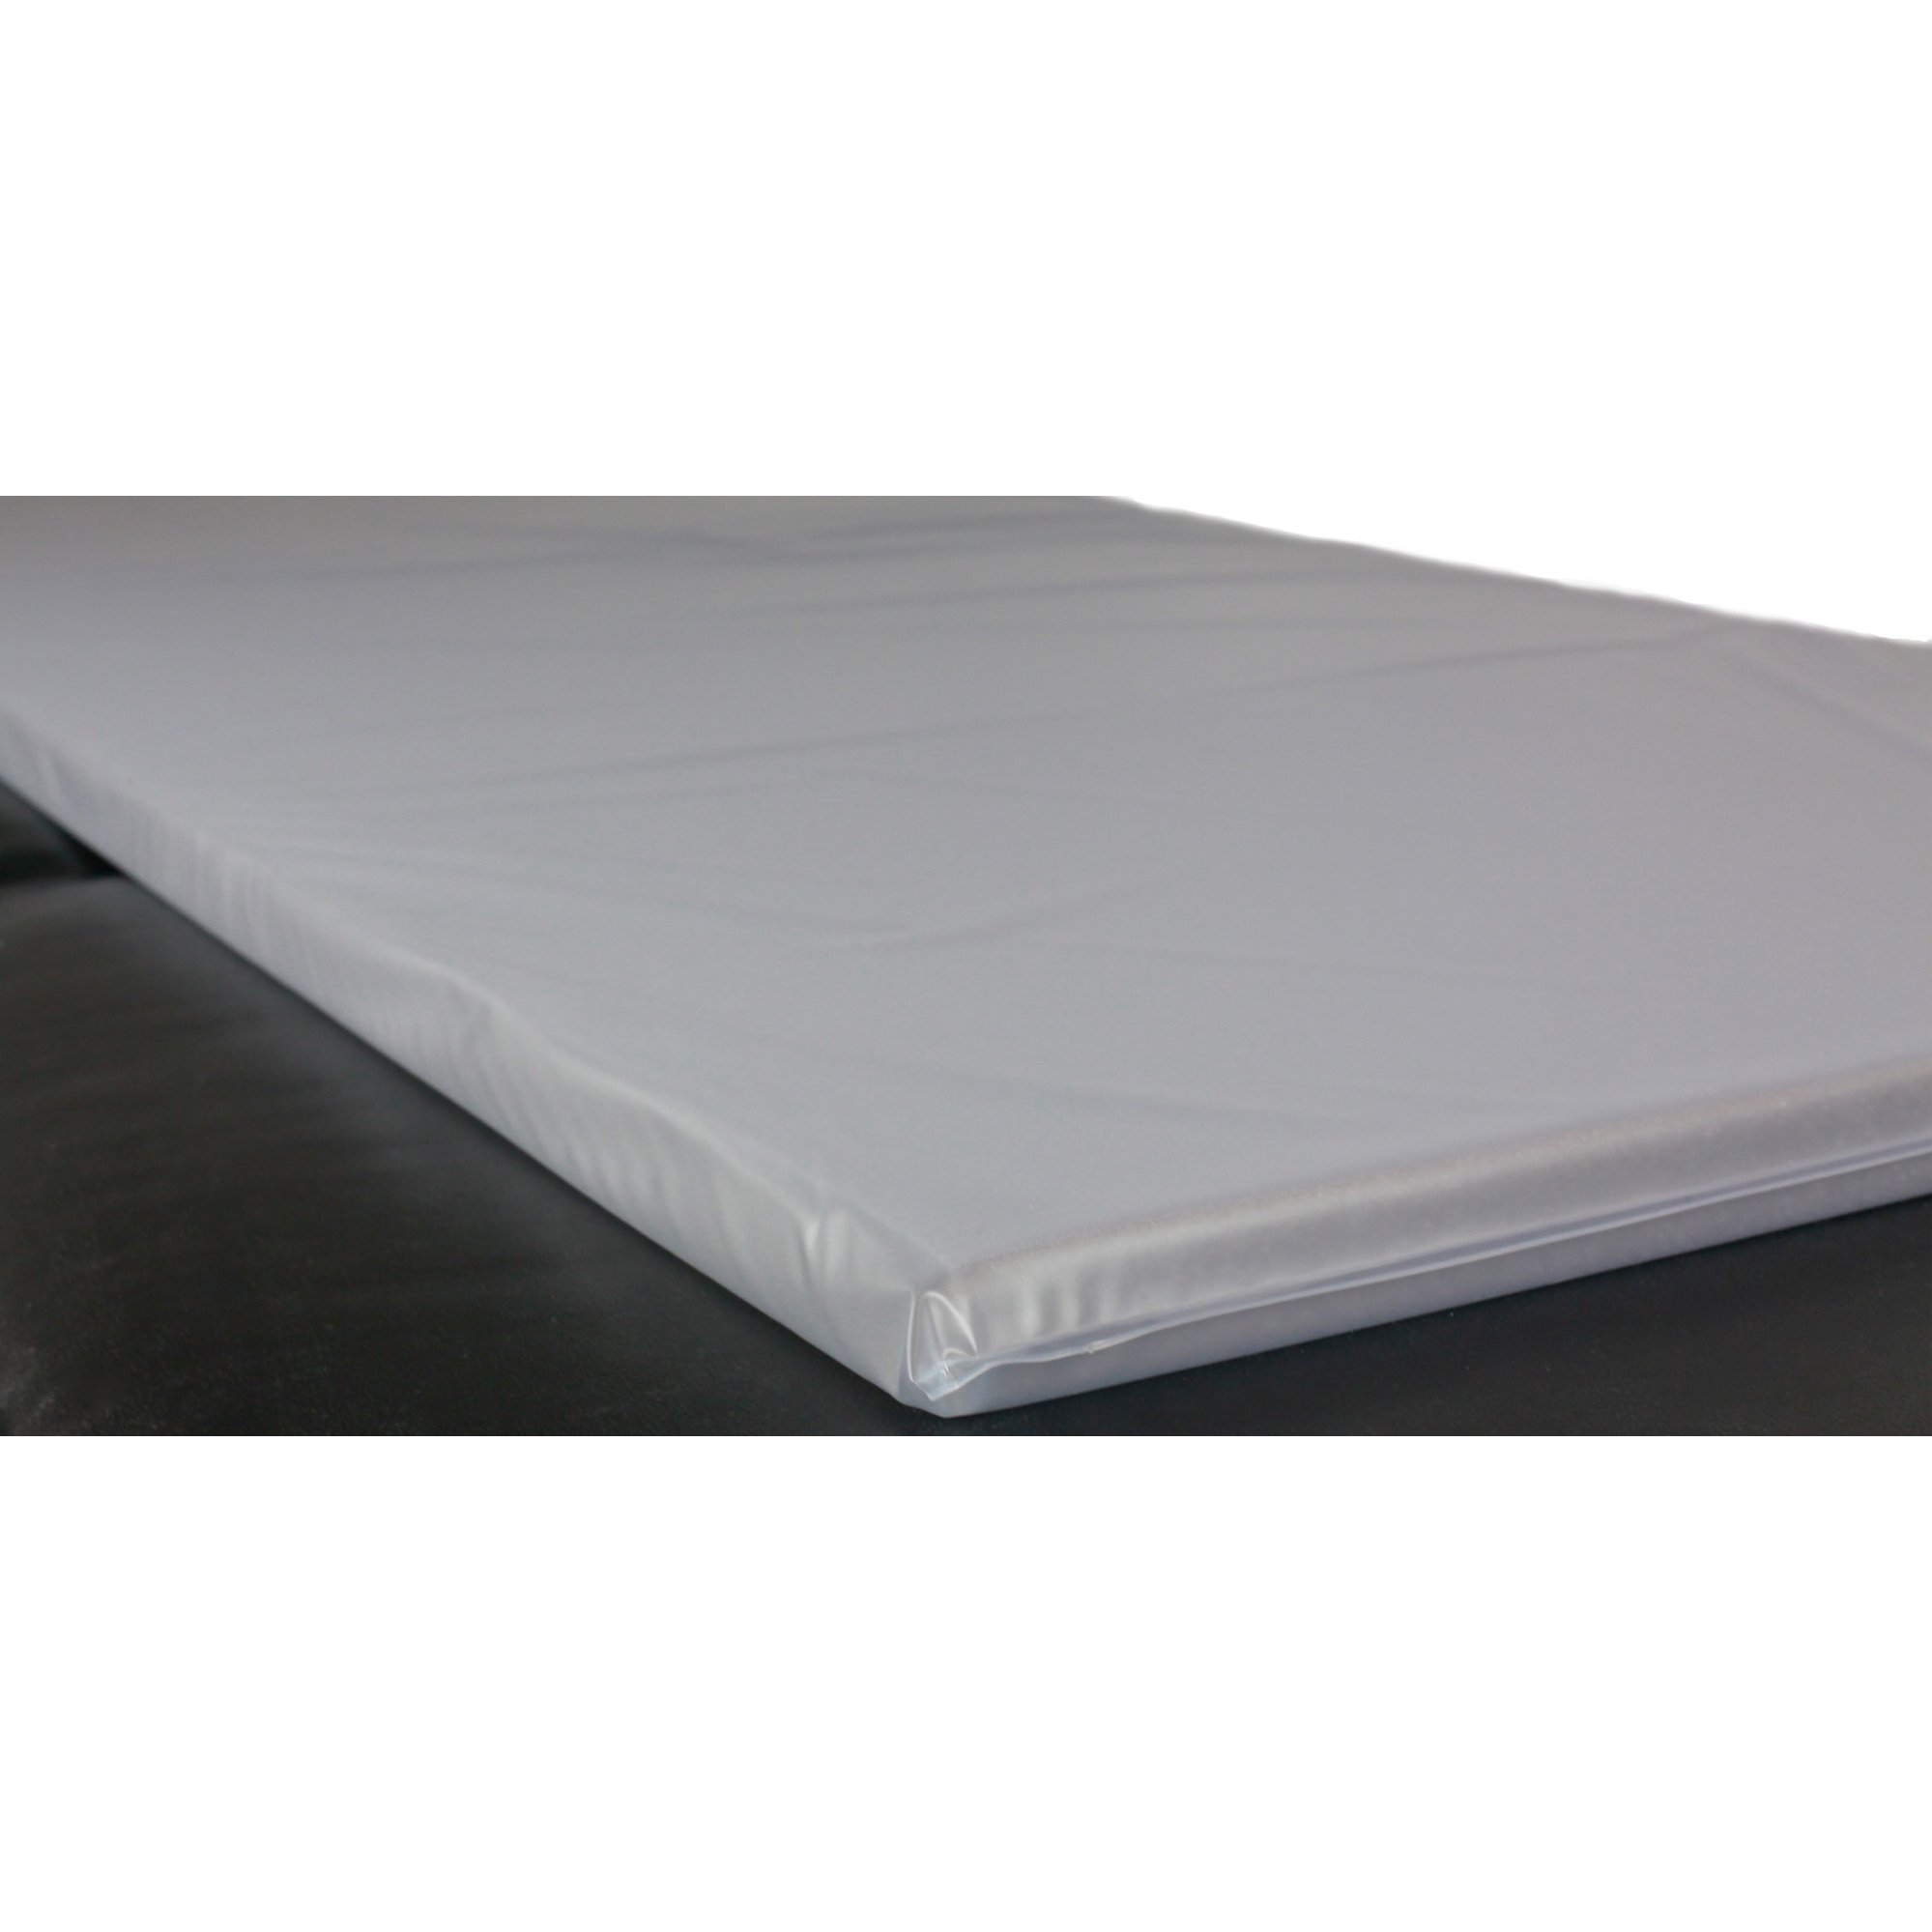 Table Pads, Table Protector Pad